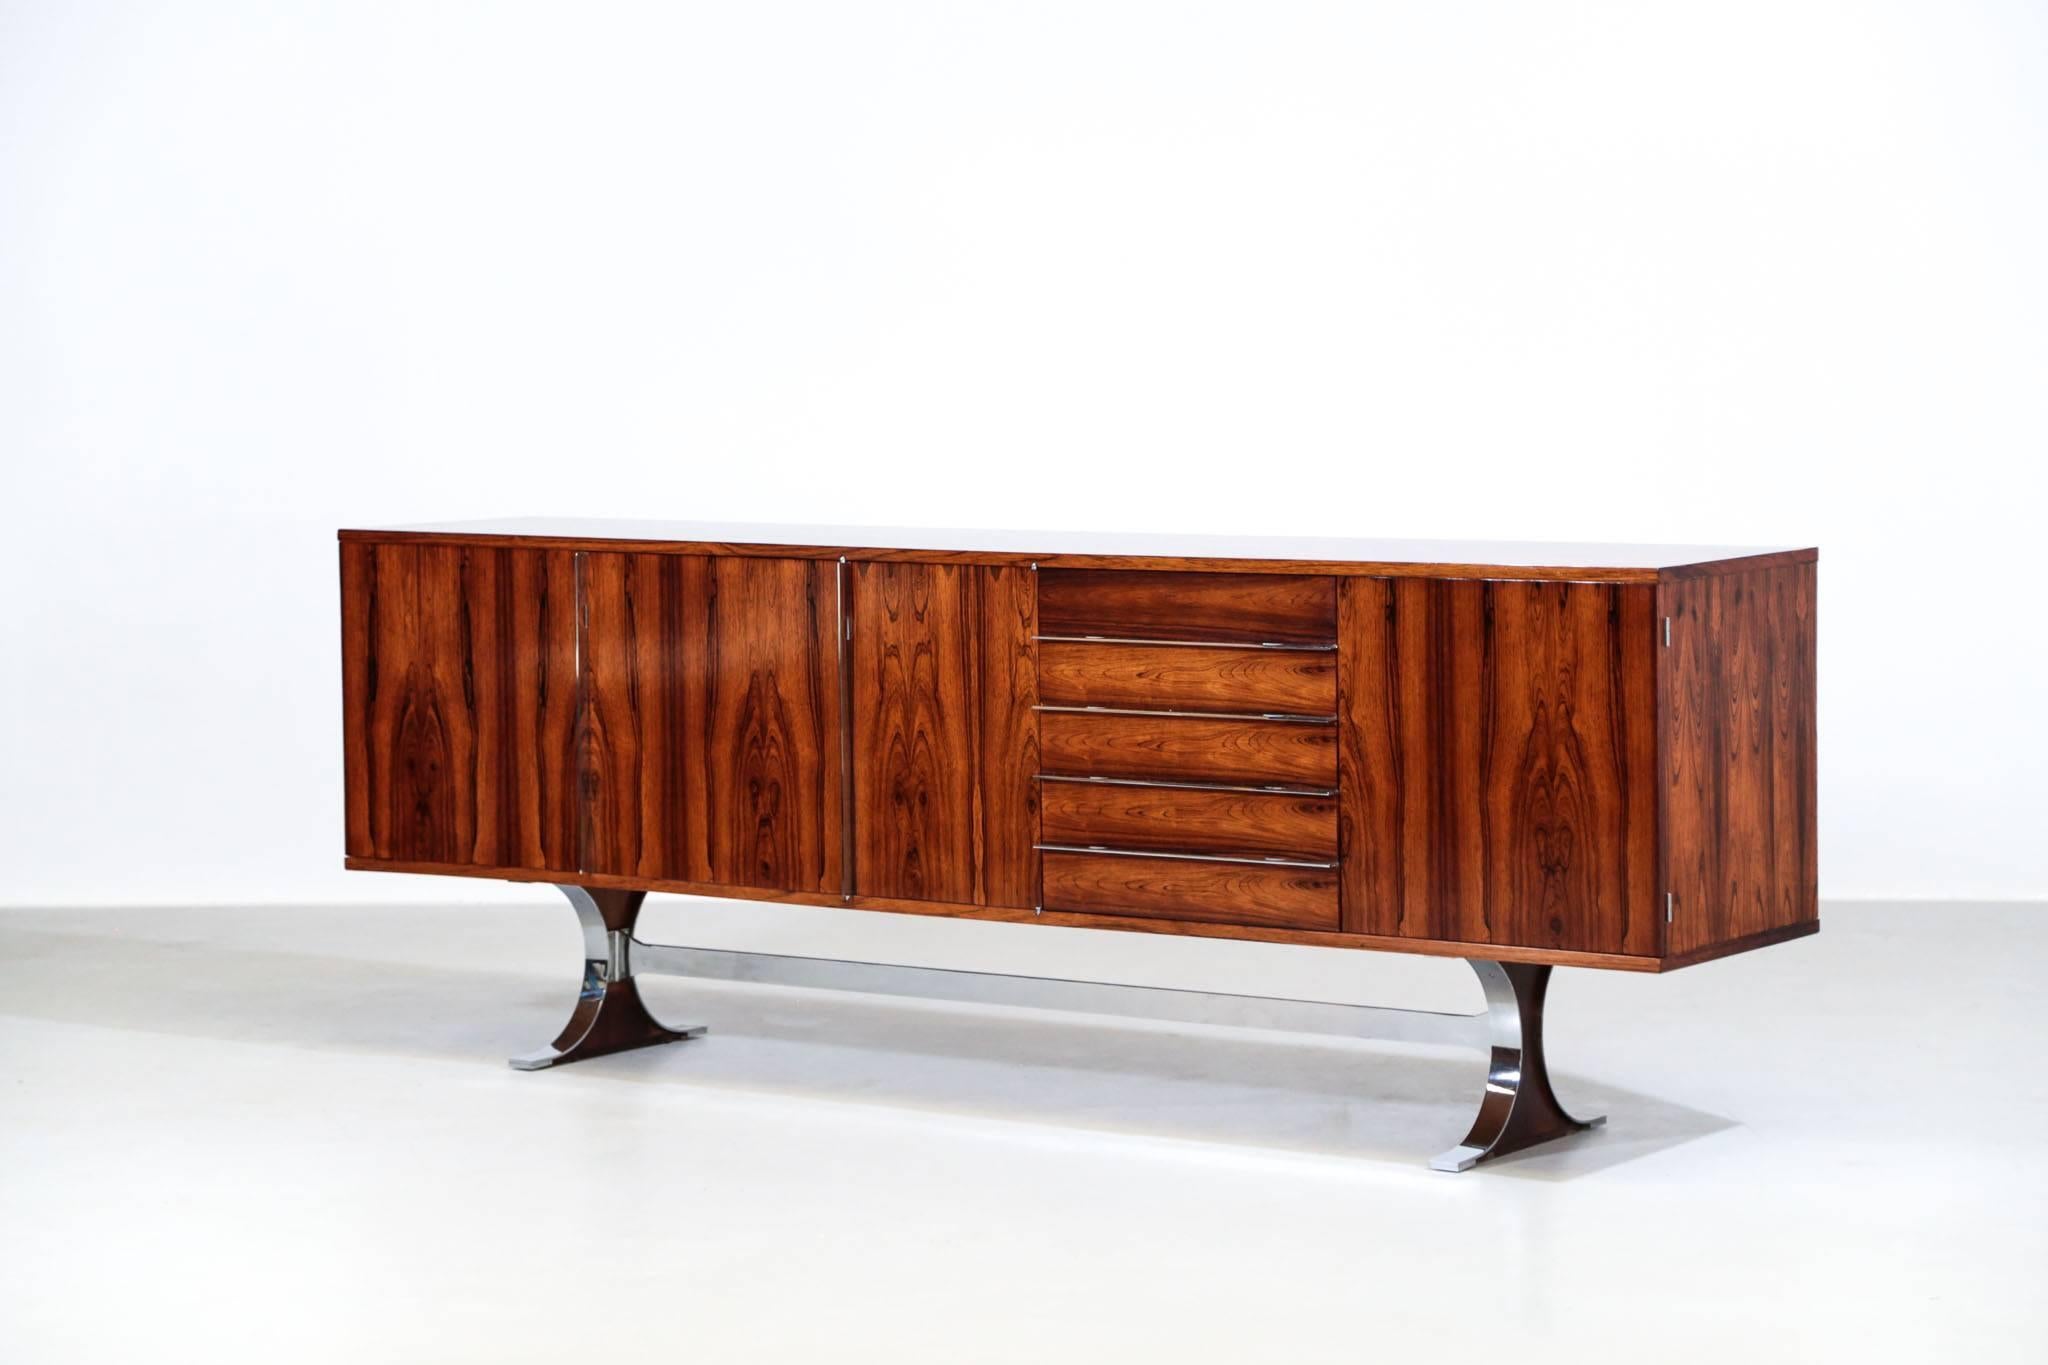 Rare rosewood sideboard designed by Jean Rene Caillette for Charron in 1960s.
Excellent condition.
It has been restored by a cabinetmaker.